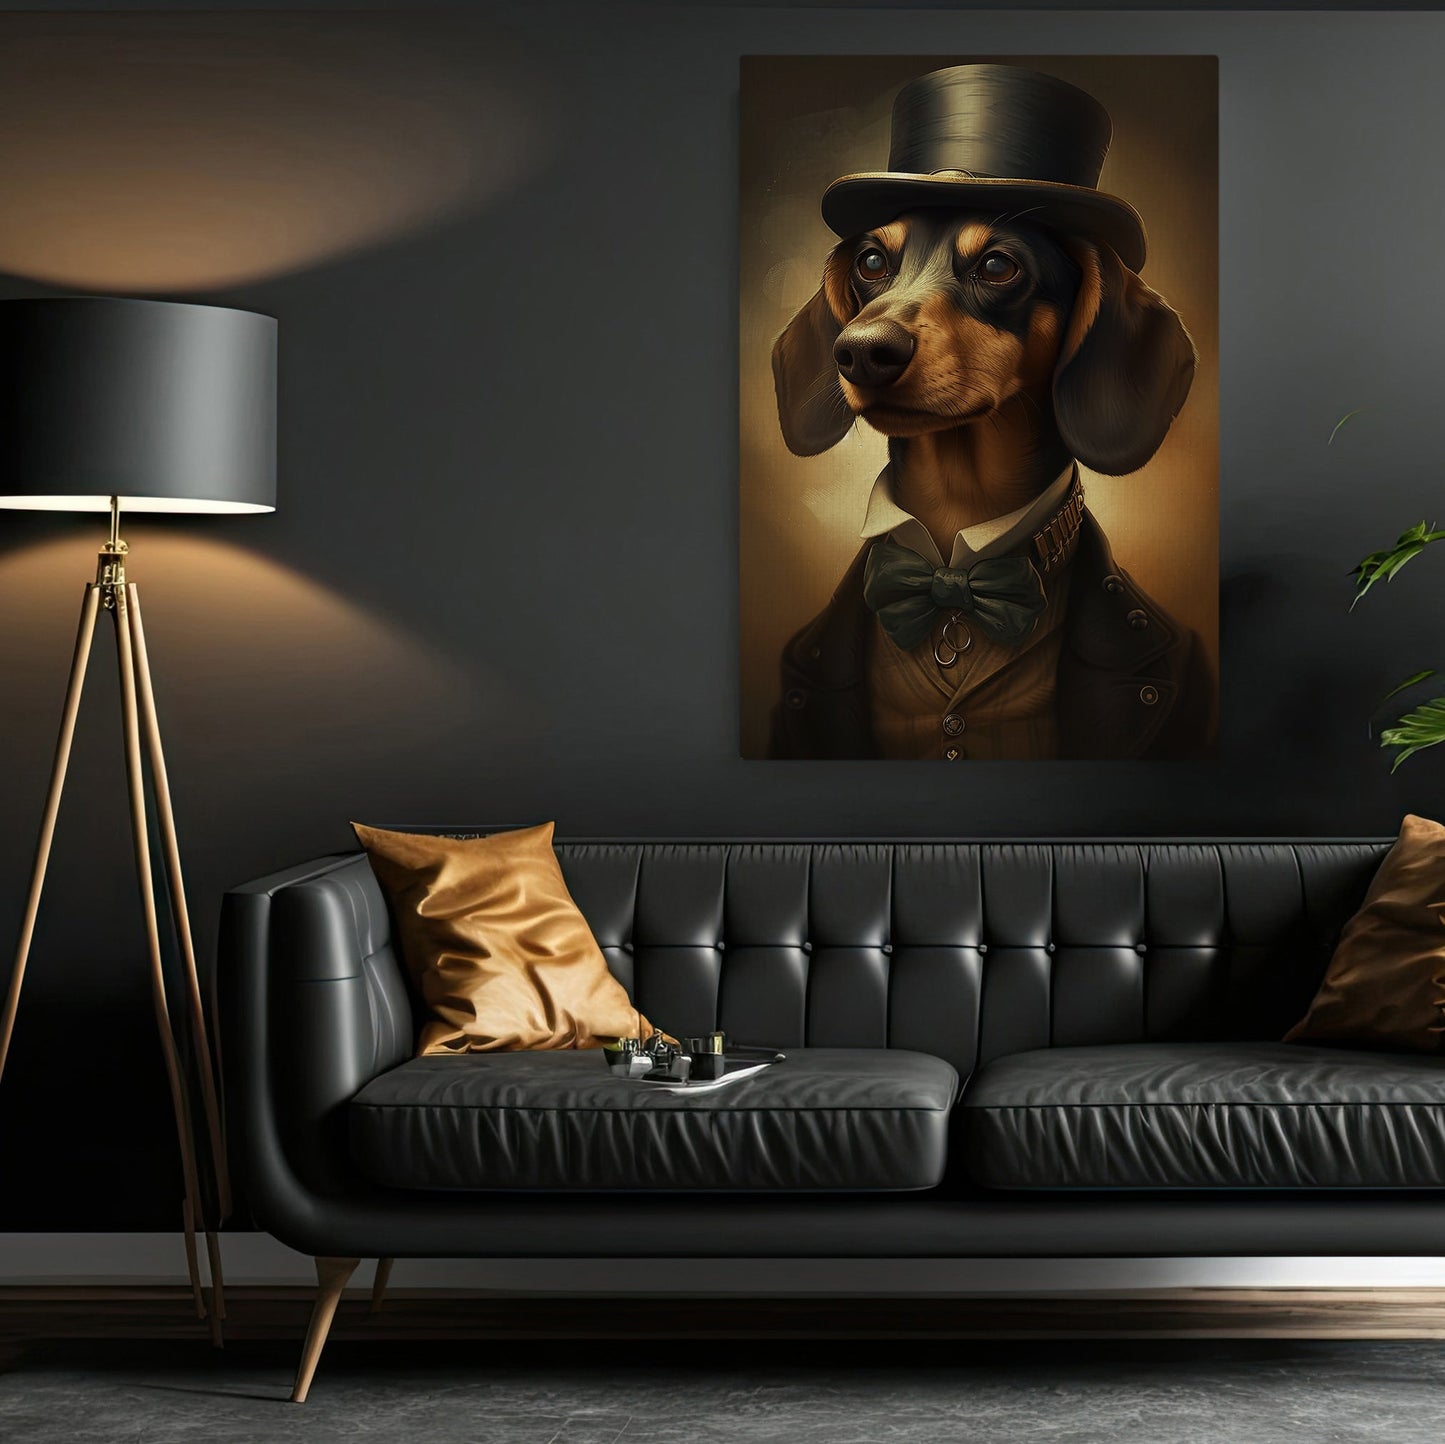 Gentlemen Dachshund In Victorian Style, Victorian Dog Canvas Painting, Victorian Animal Wall Art Decor, Poster Gift For Dachshund Dog Lovers